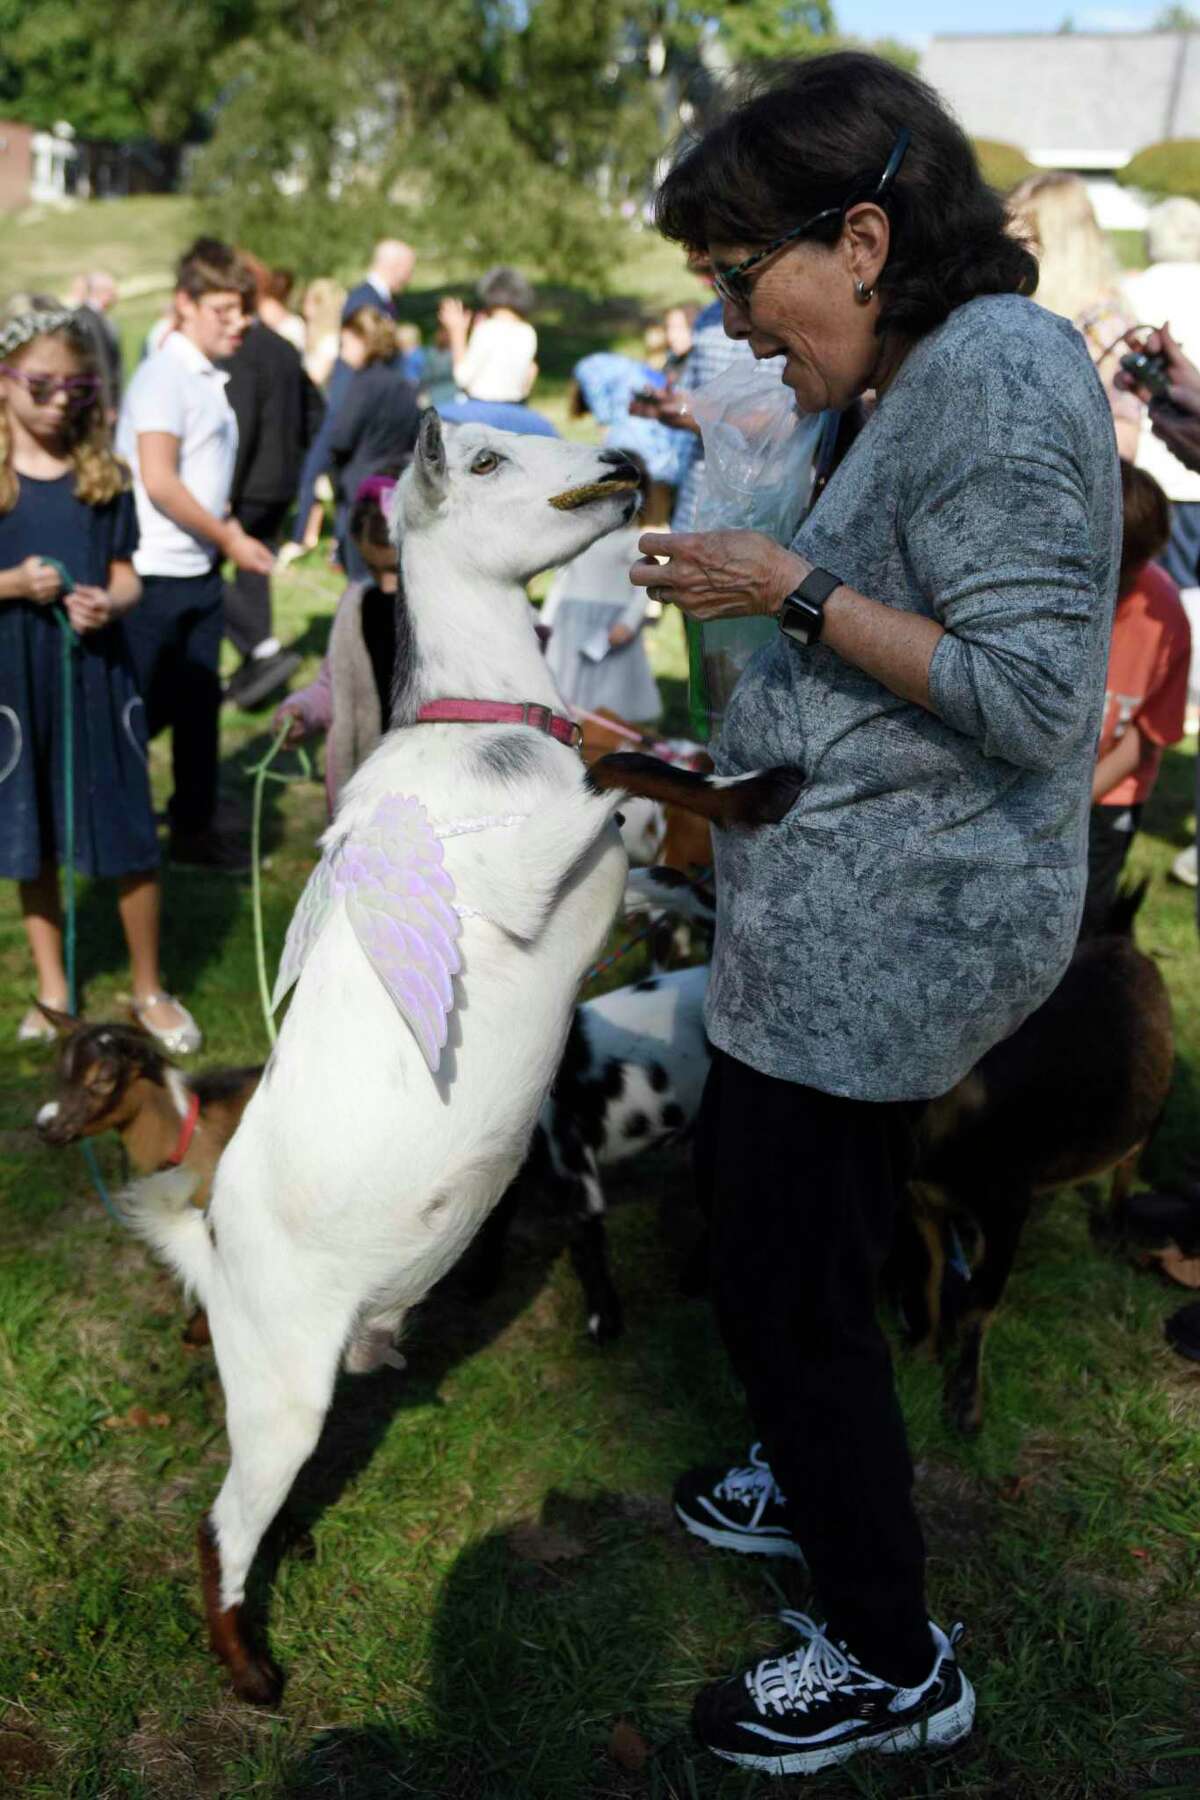 A goat jumps up on Eileen Orlow, of Stamford, as she attempts to "feed her sins" to the goat after Rosh Hashana services at Temple Sinai in Stamford, Conn. Monday, Sept. 26, 2022. Congregants usually throw breadcrumbs in the water as a symbol of purging their sins, but the water was dried up from drought this year so they "fed their sins" to 13 goats on the temple lawn.